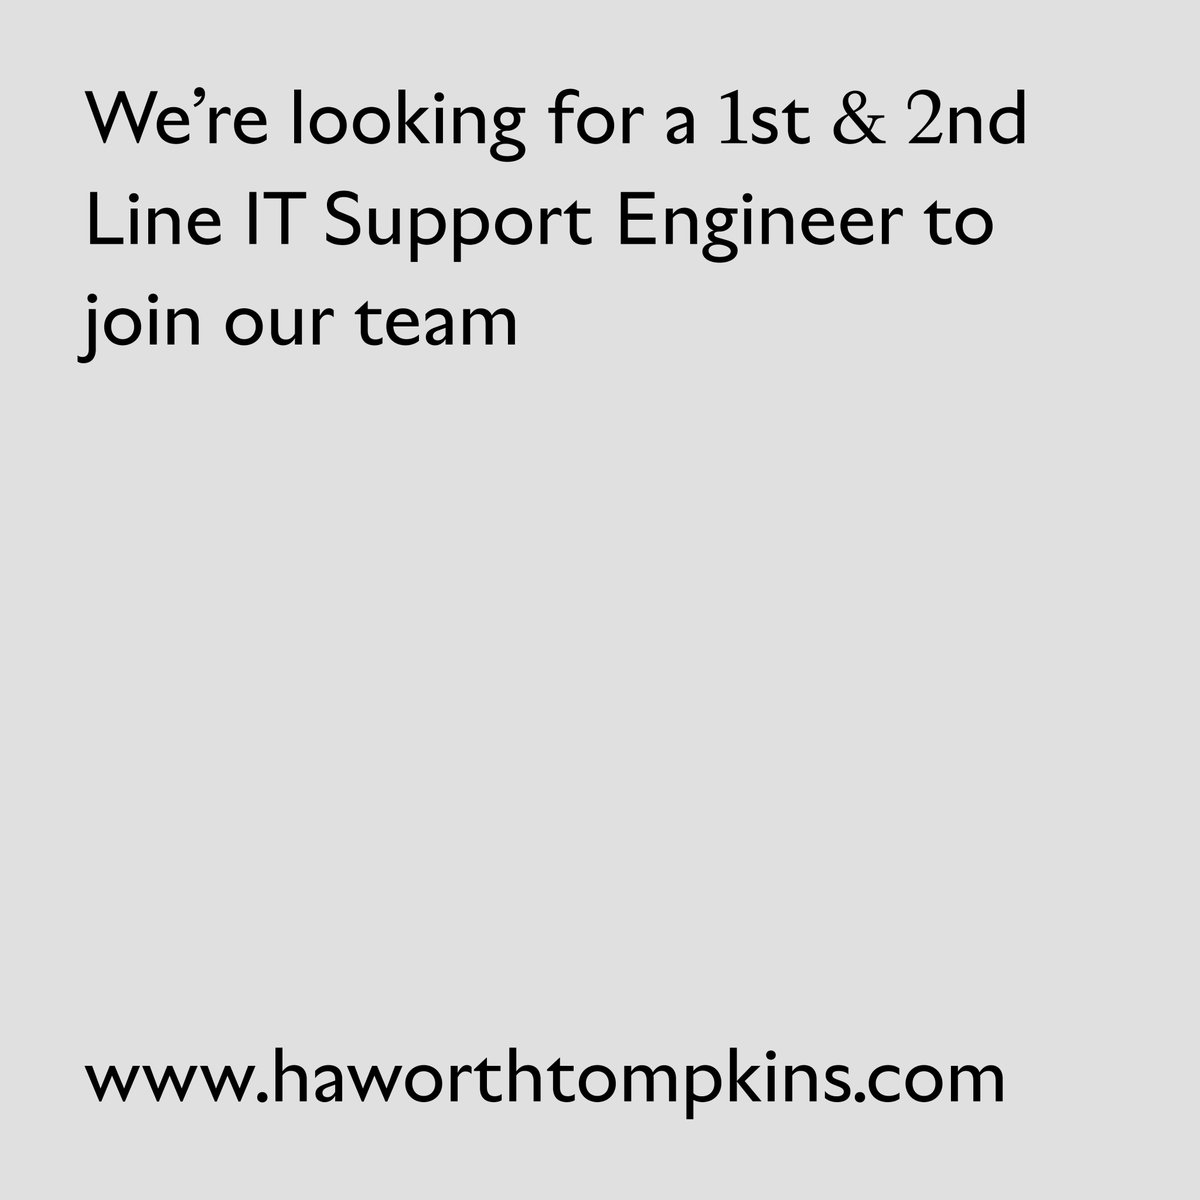 We’re looking for a 1st & 2nd Line IT Support Engineer to join our team - For more details and to apply - haworthtompkins.com/studio/jobs #HaworthTompkins #ITSupport #newopportunity #career